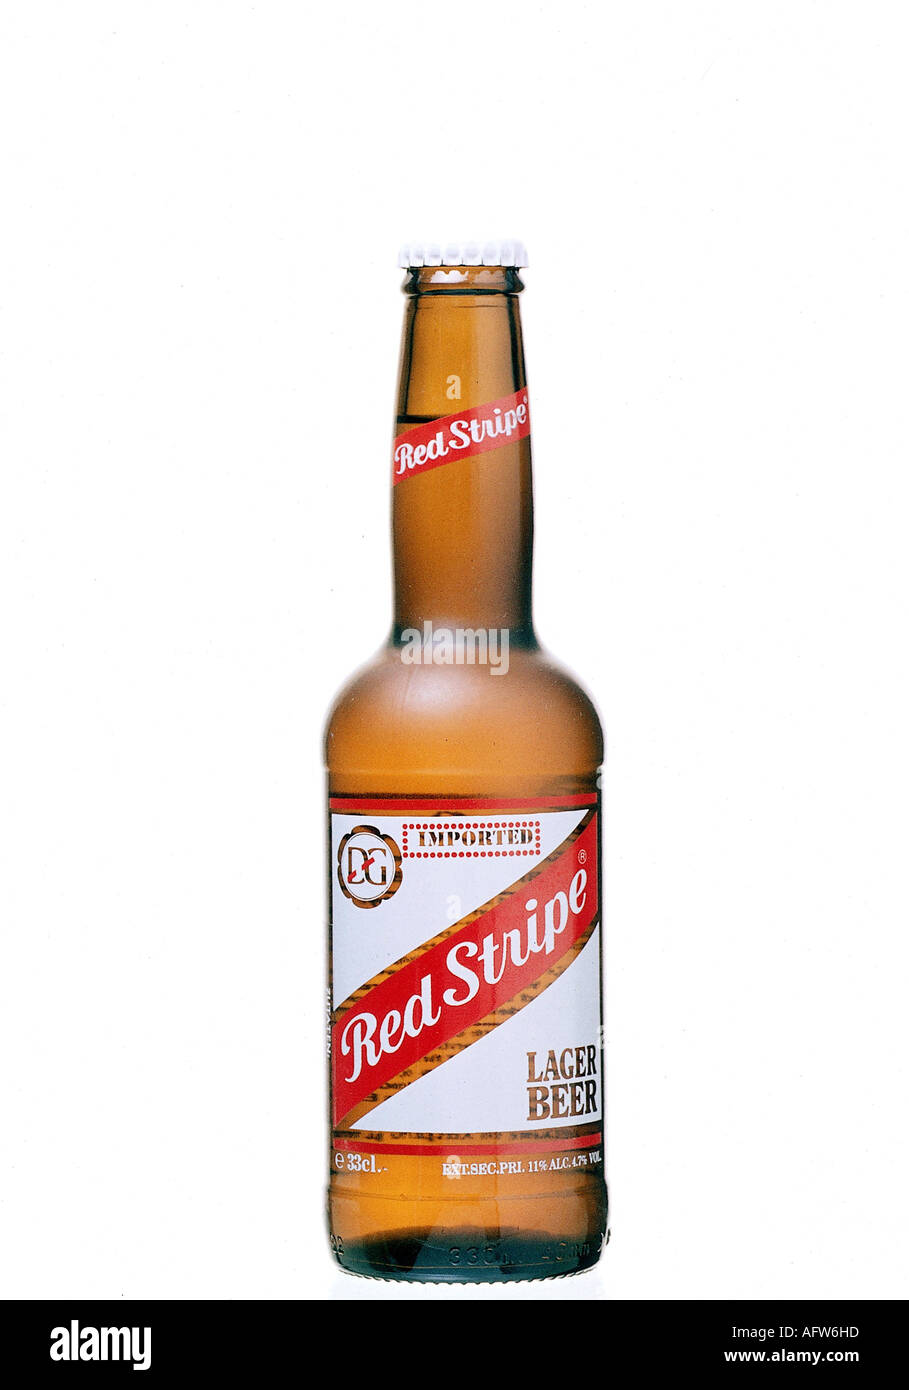 food and beverages, alcohol, beer, bottle 'Red Stripe Lager Beer', Desnoes and Geddes, Jamaica, bottles, Additional-Rights-Clearance-Info-Not-Available Stock Photo